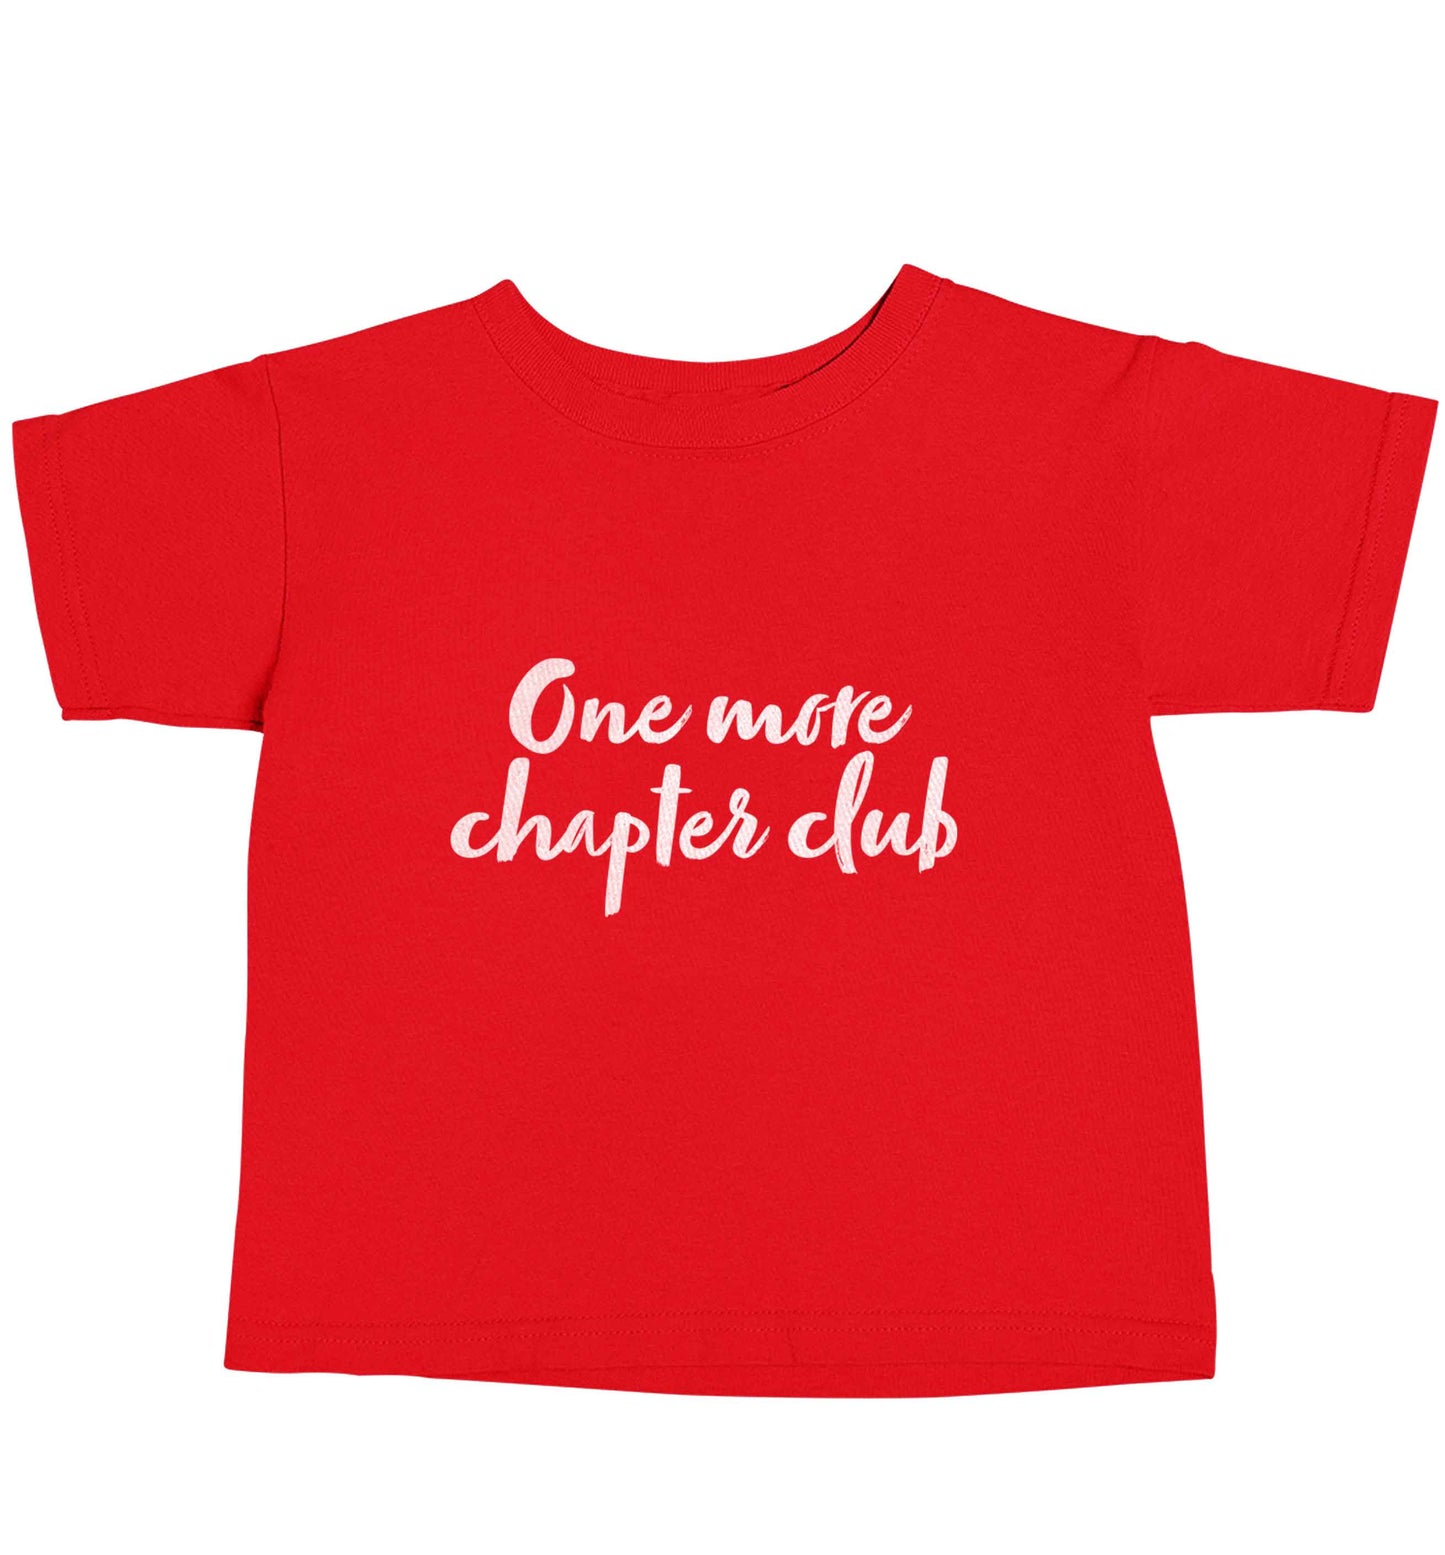 One more chapter club Kit red baby toddler Tshirt 2 Years